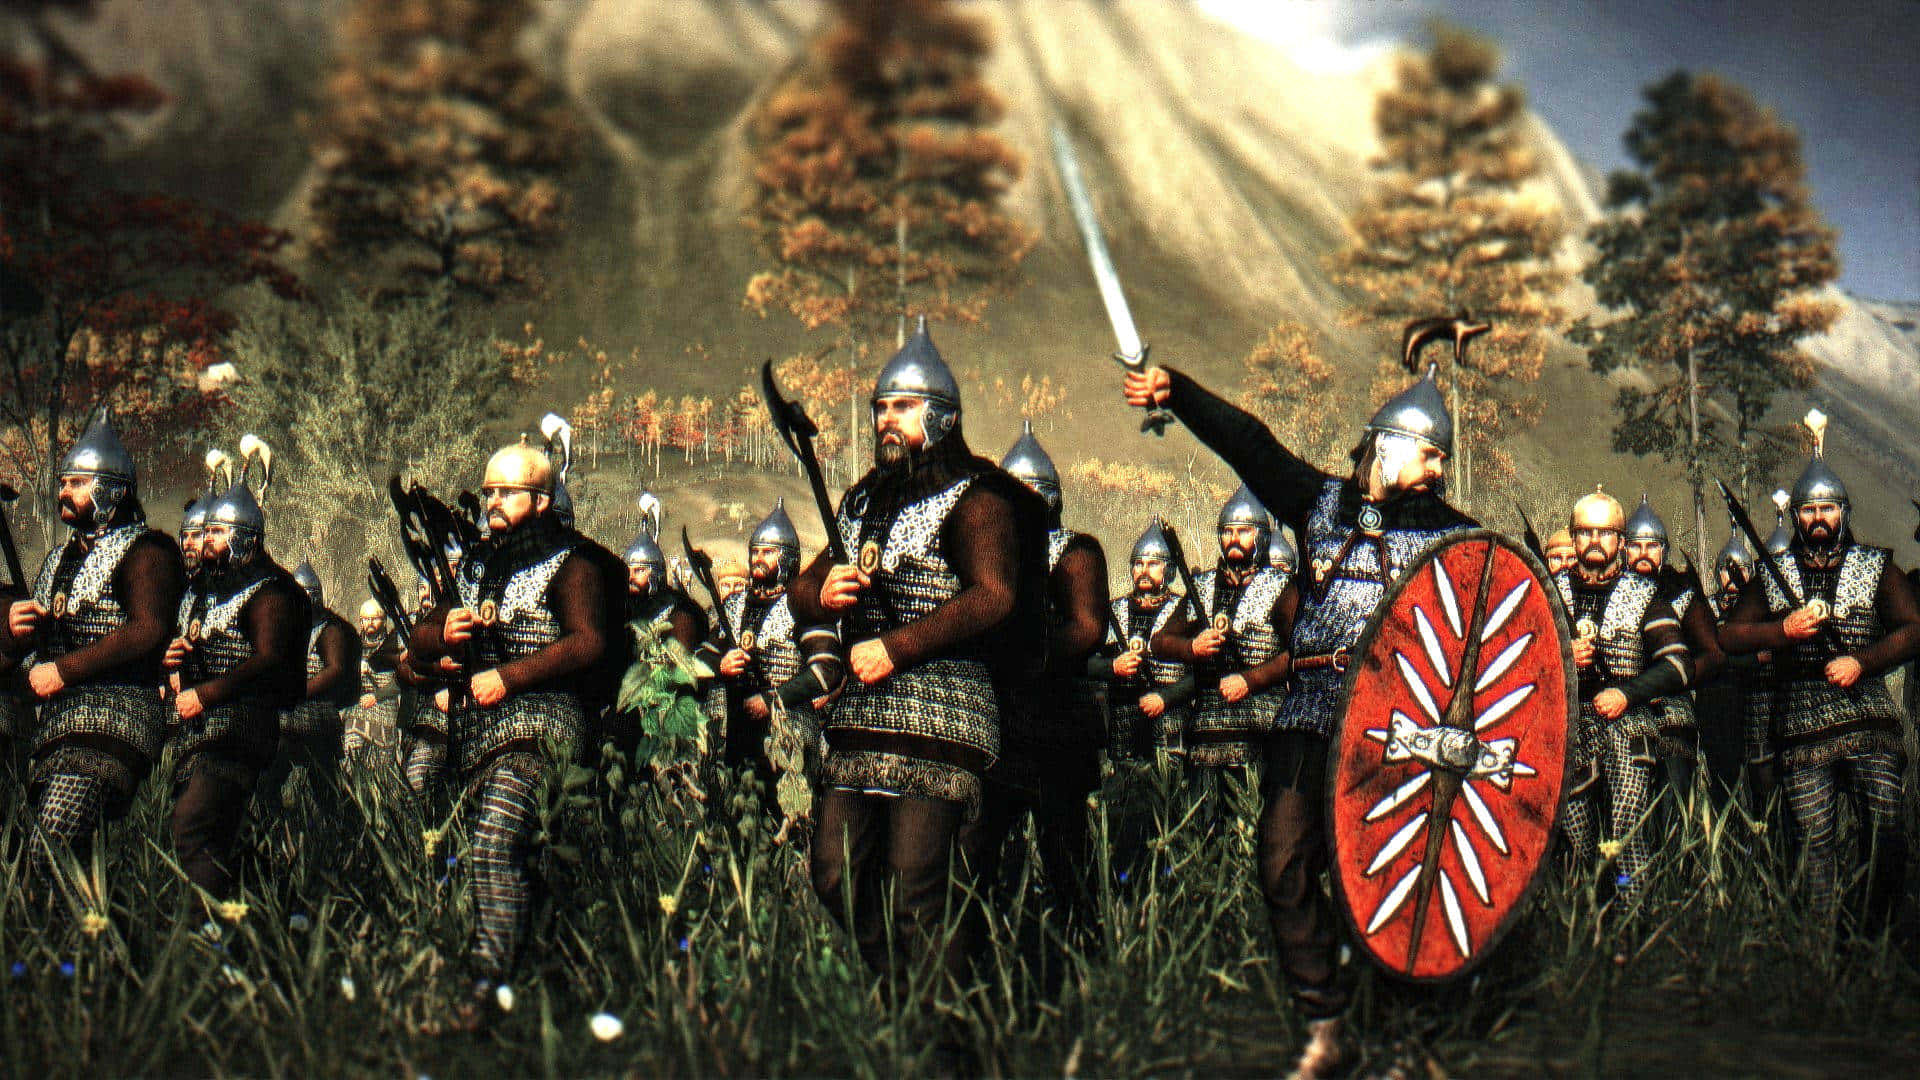 A Group Of Men In Armor And Shields Are Standing In A Field